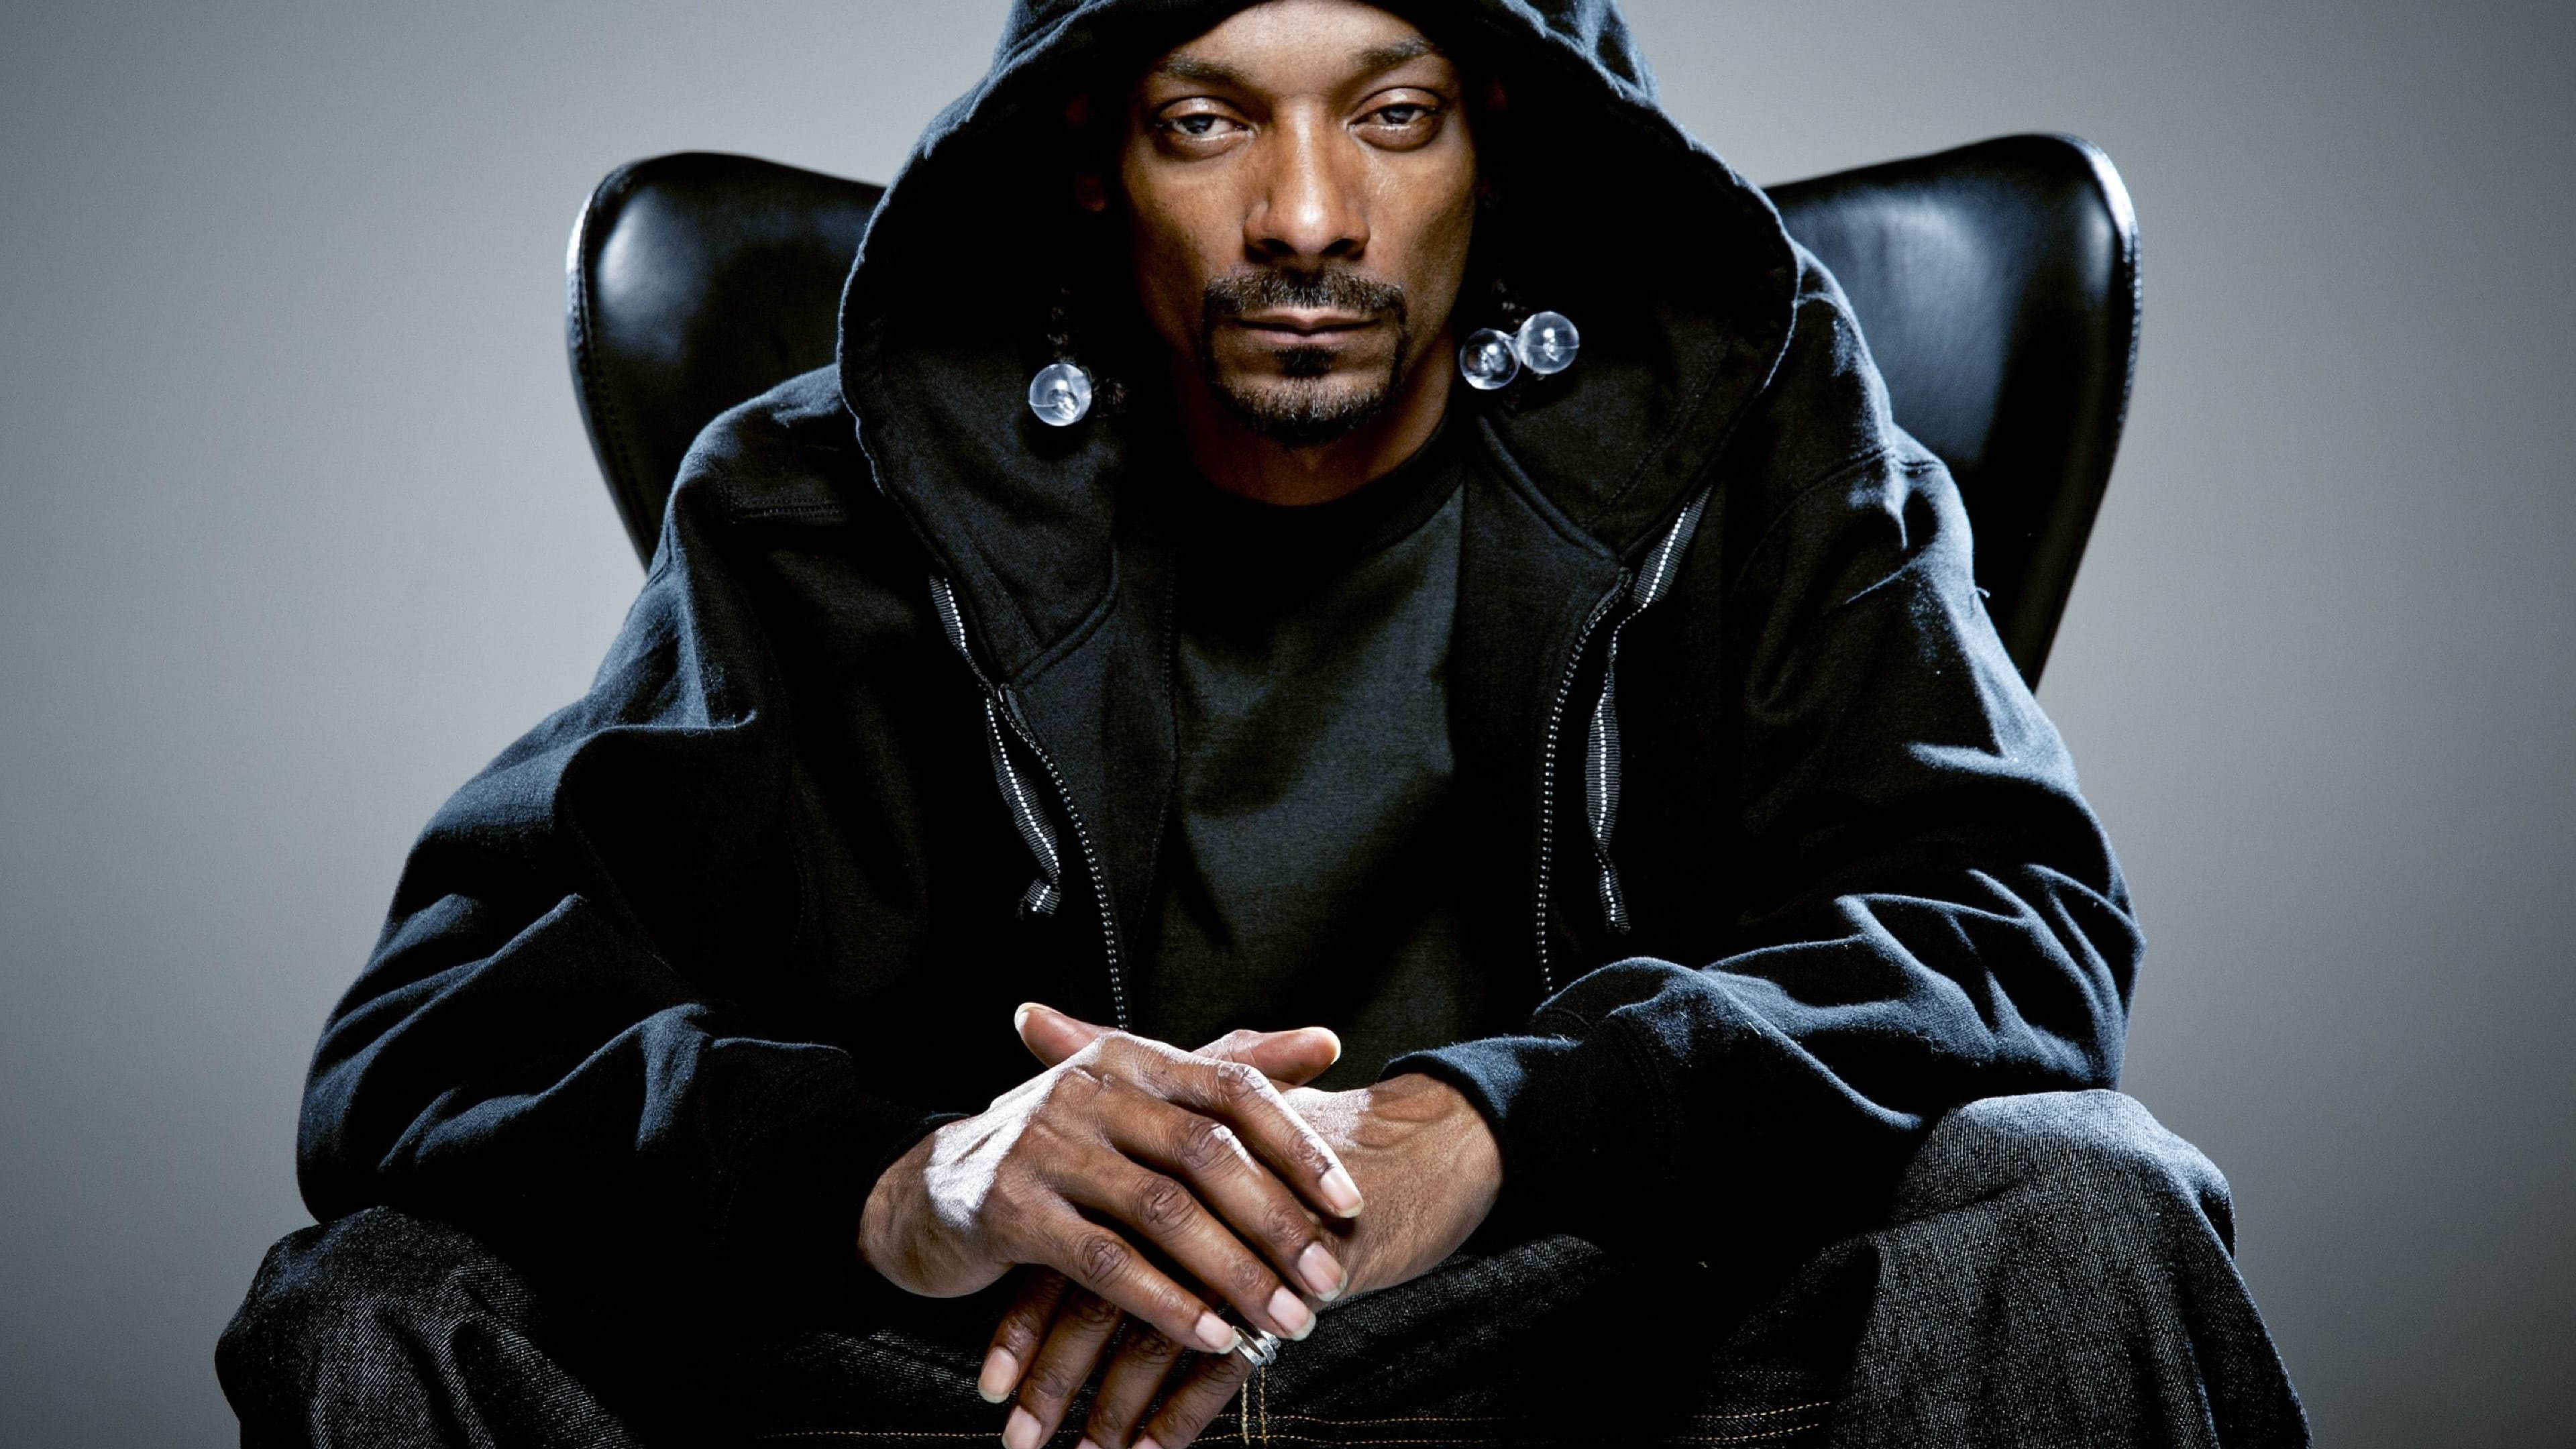 New Wallpapers - Snoop Dogg , HD Wallpaper & Backgrounds